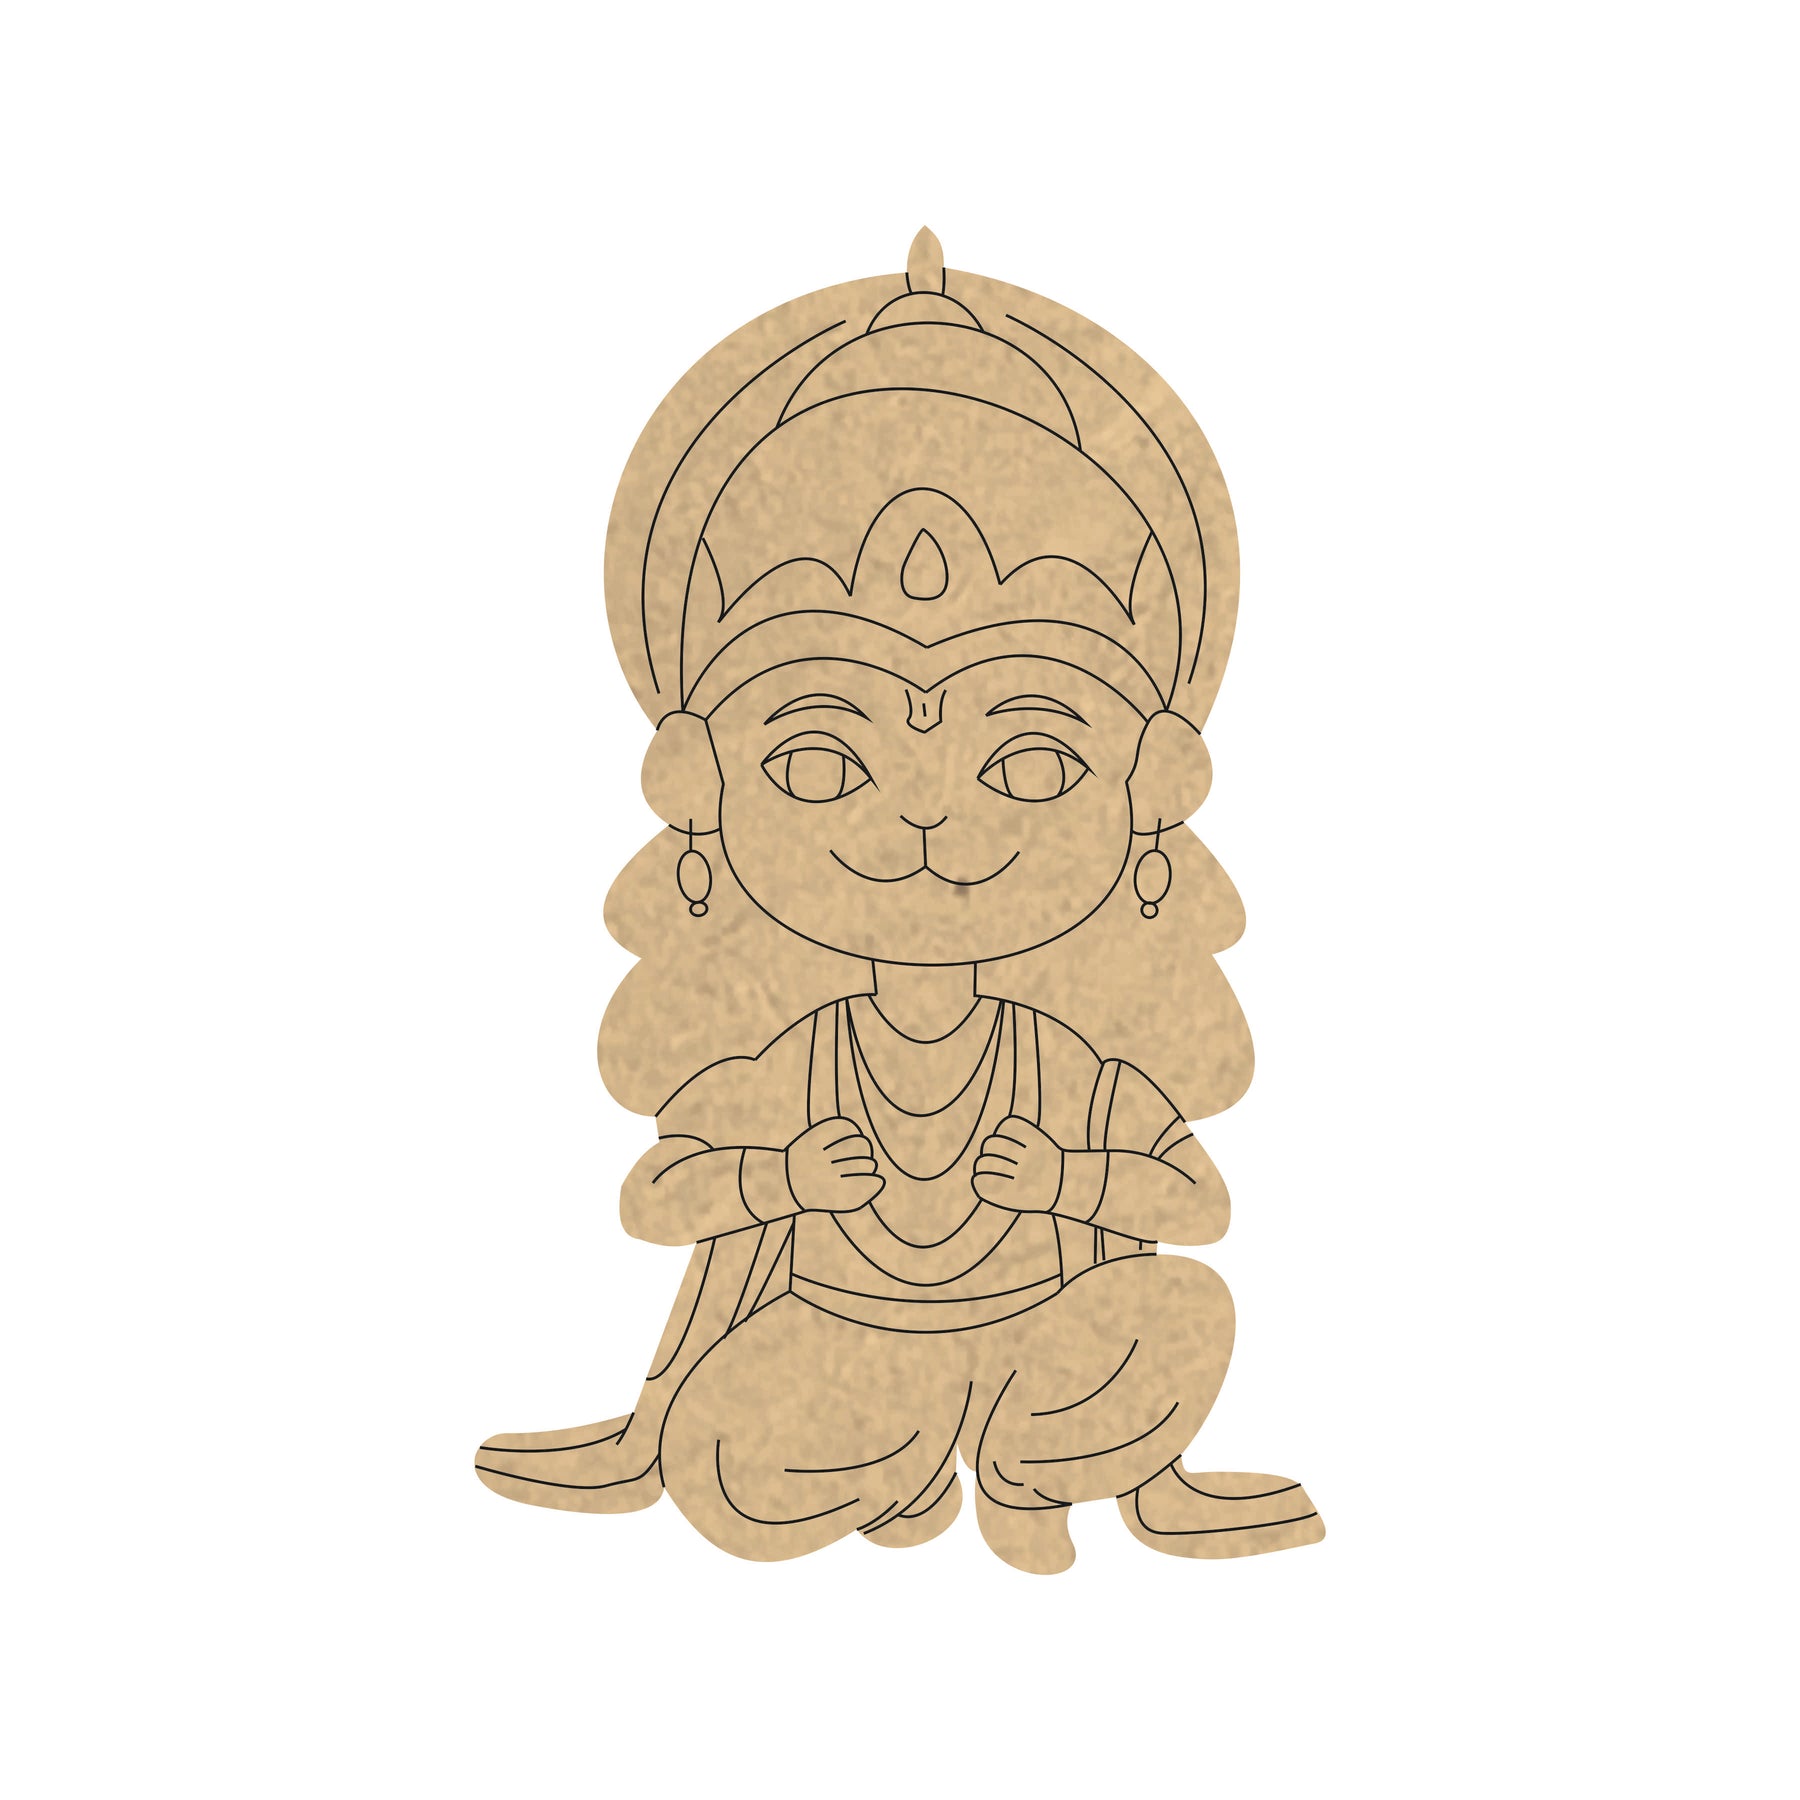 how to draw little hanuman step by step - YouTube